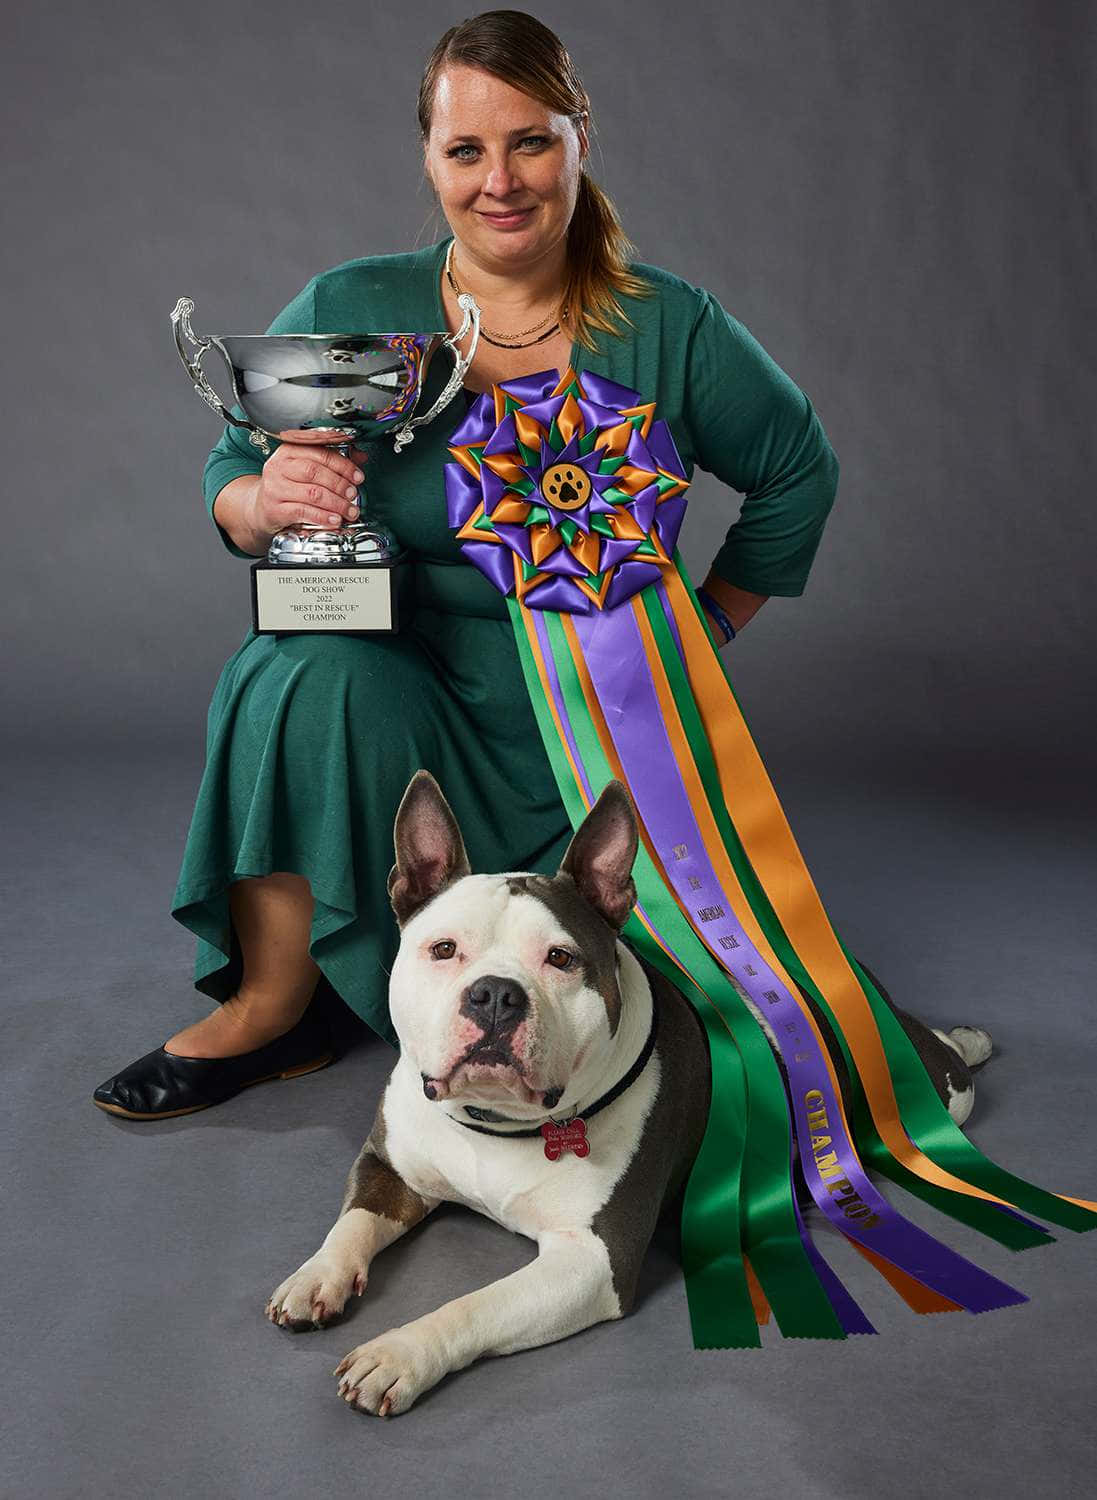 A Woman With A Dog Holding A Ribbon